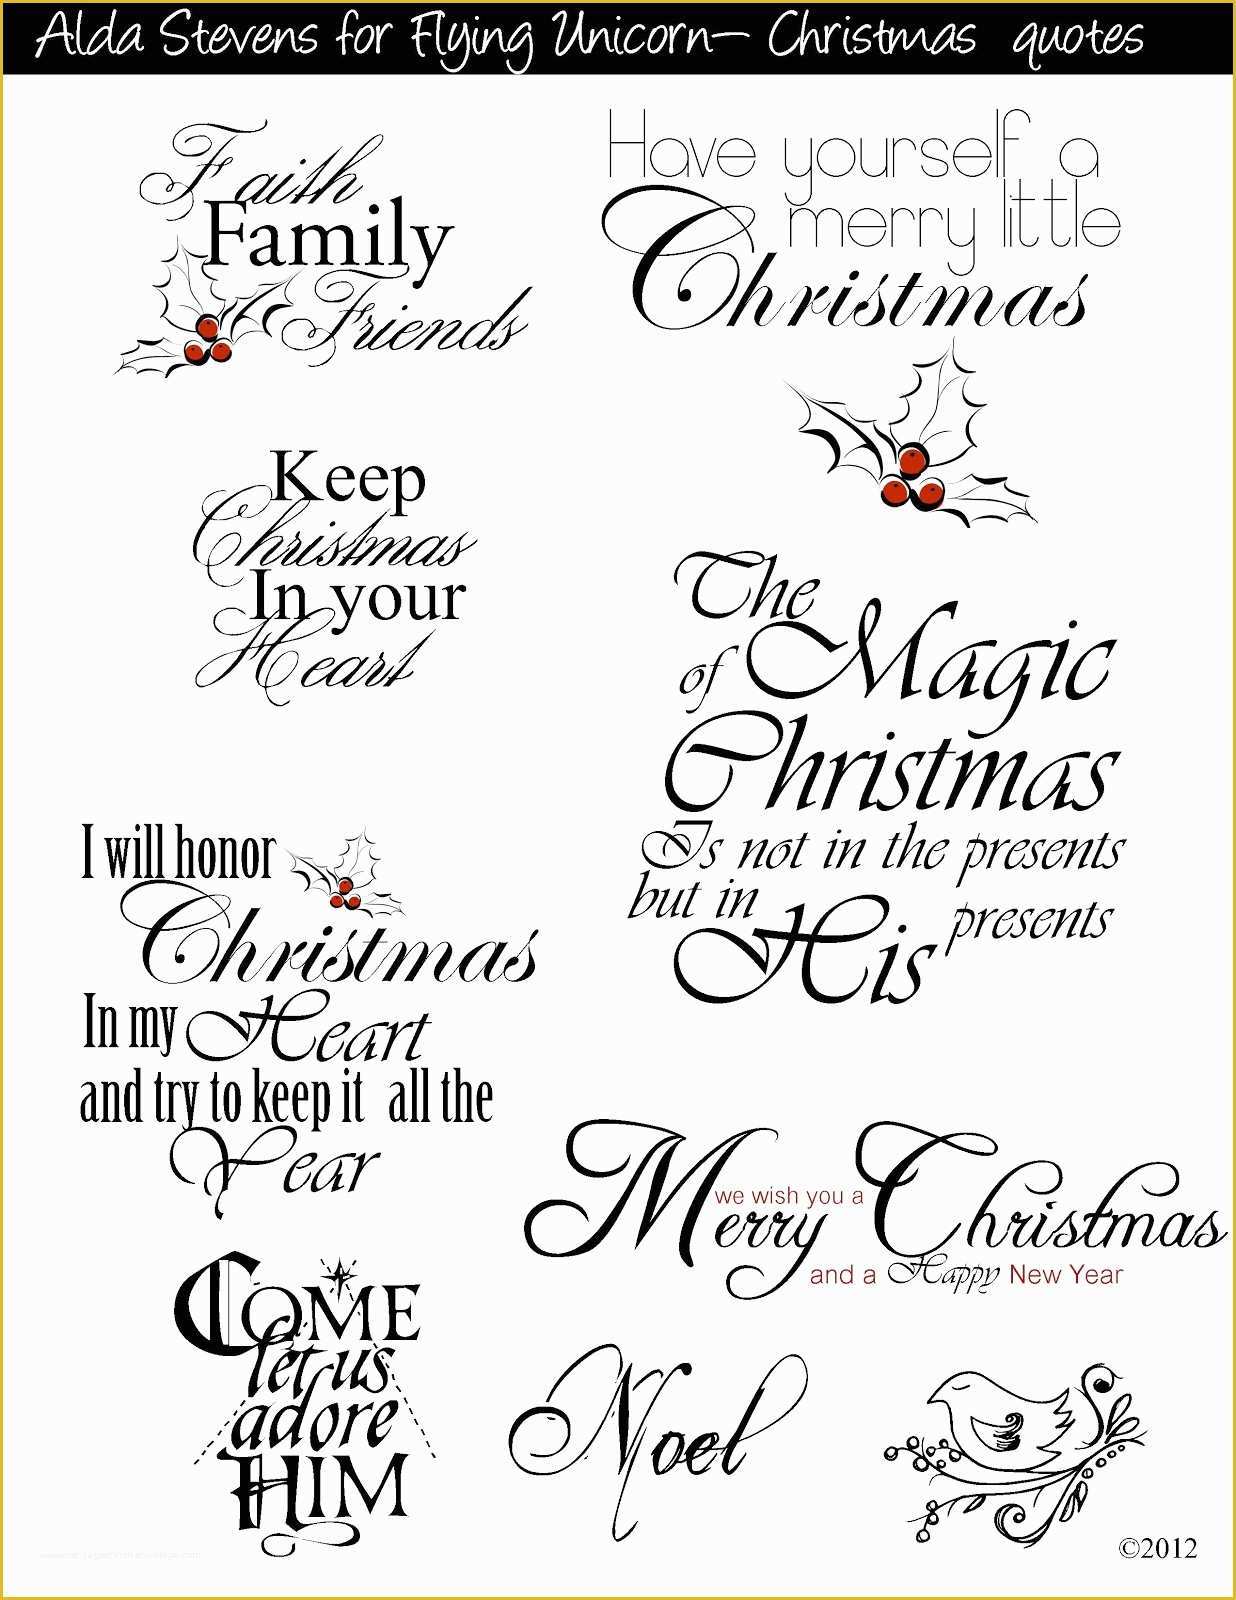 Free Printable Religious Business Card Templates Of Flying Unicorn Christmas Tags with Digi Goo S